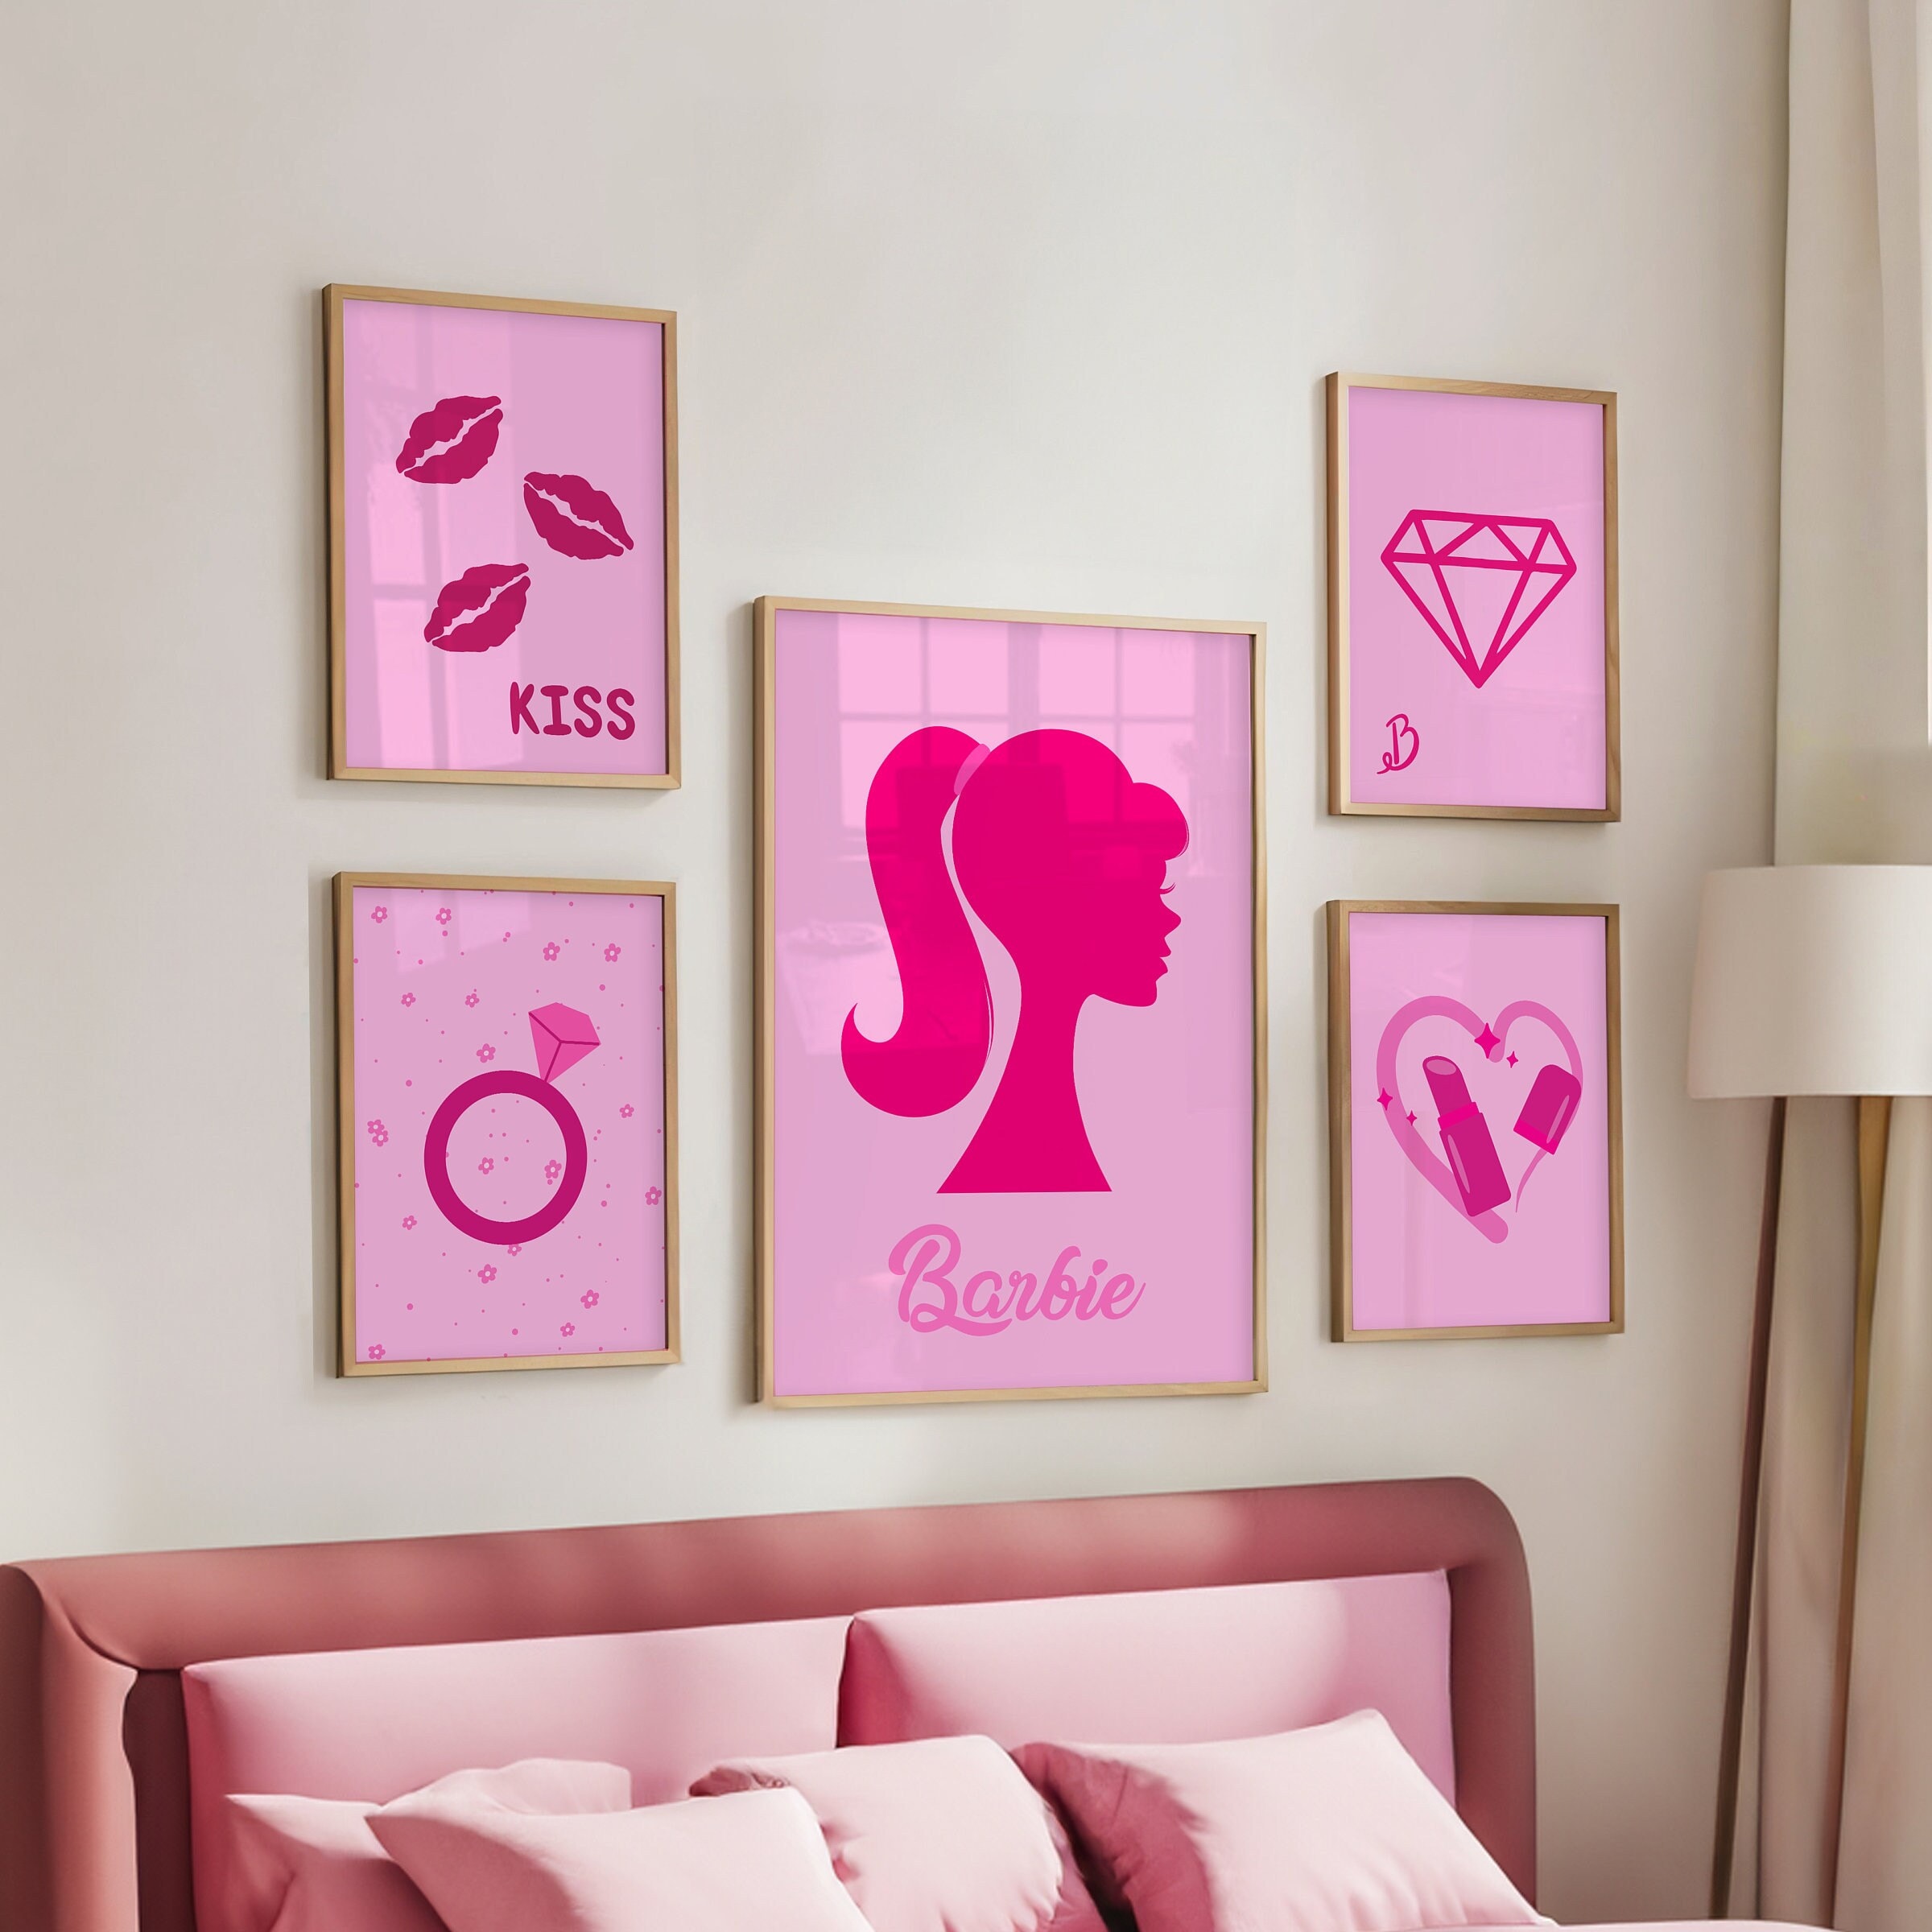 deco #chambre #bedroom #barbie #rose #pink #fille #girl #maison #hous